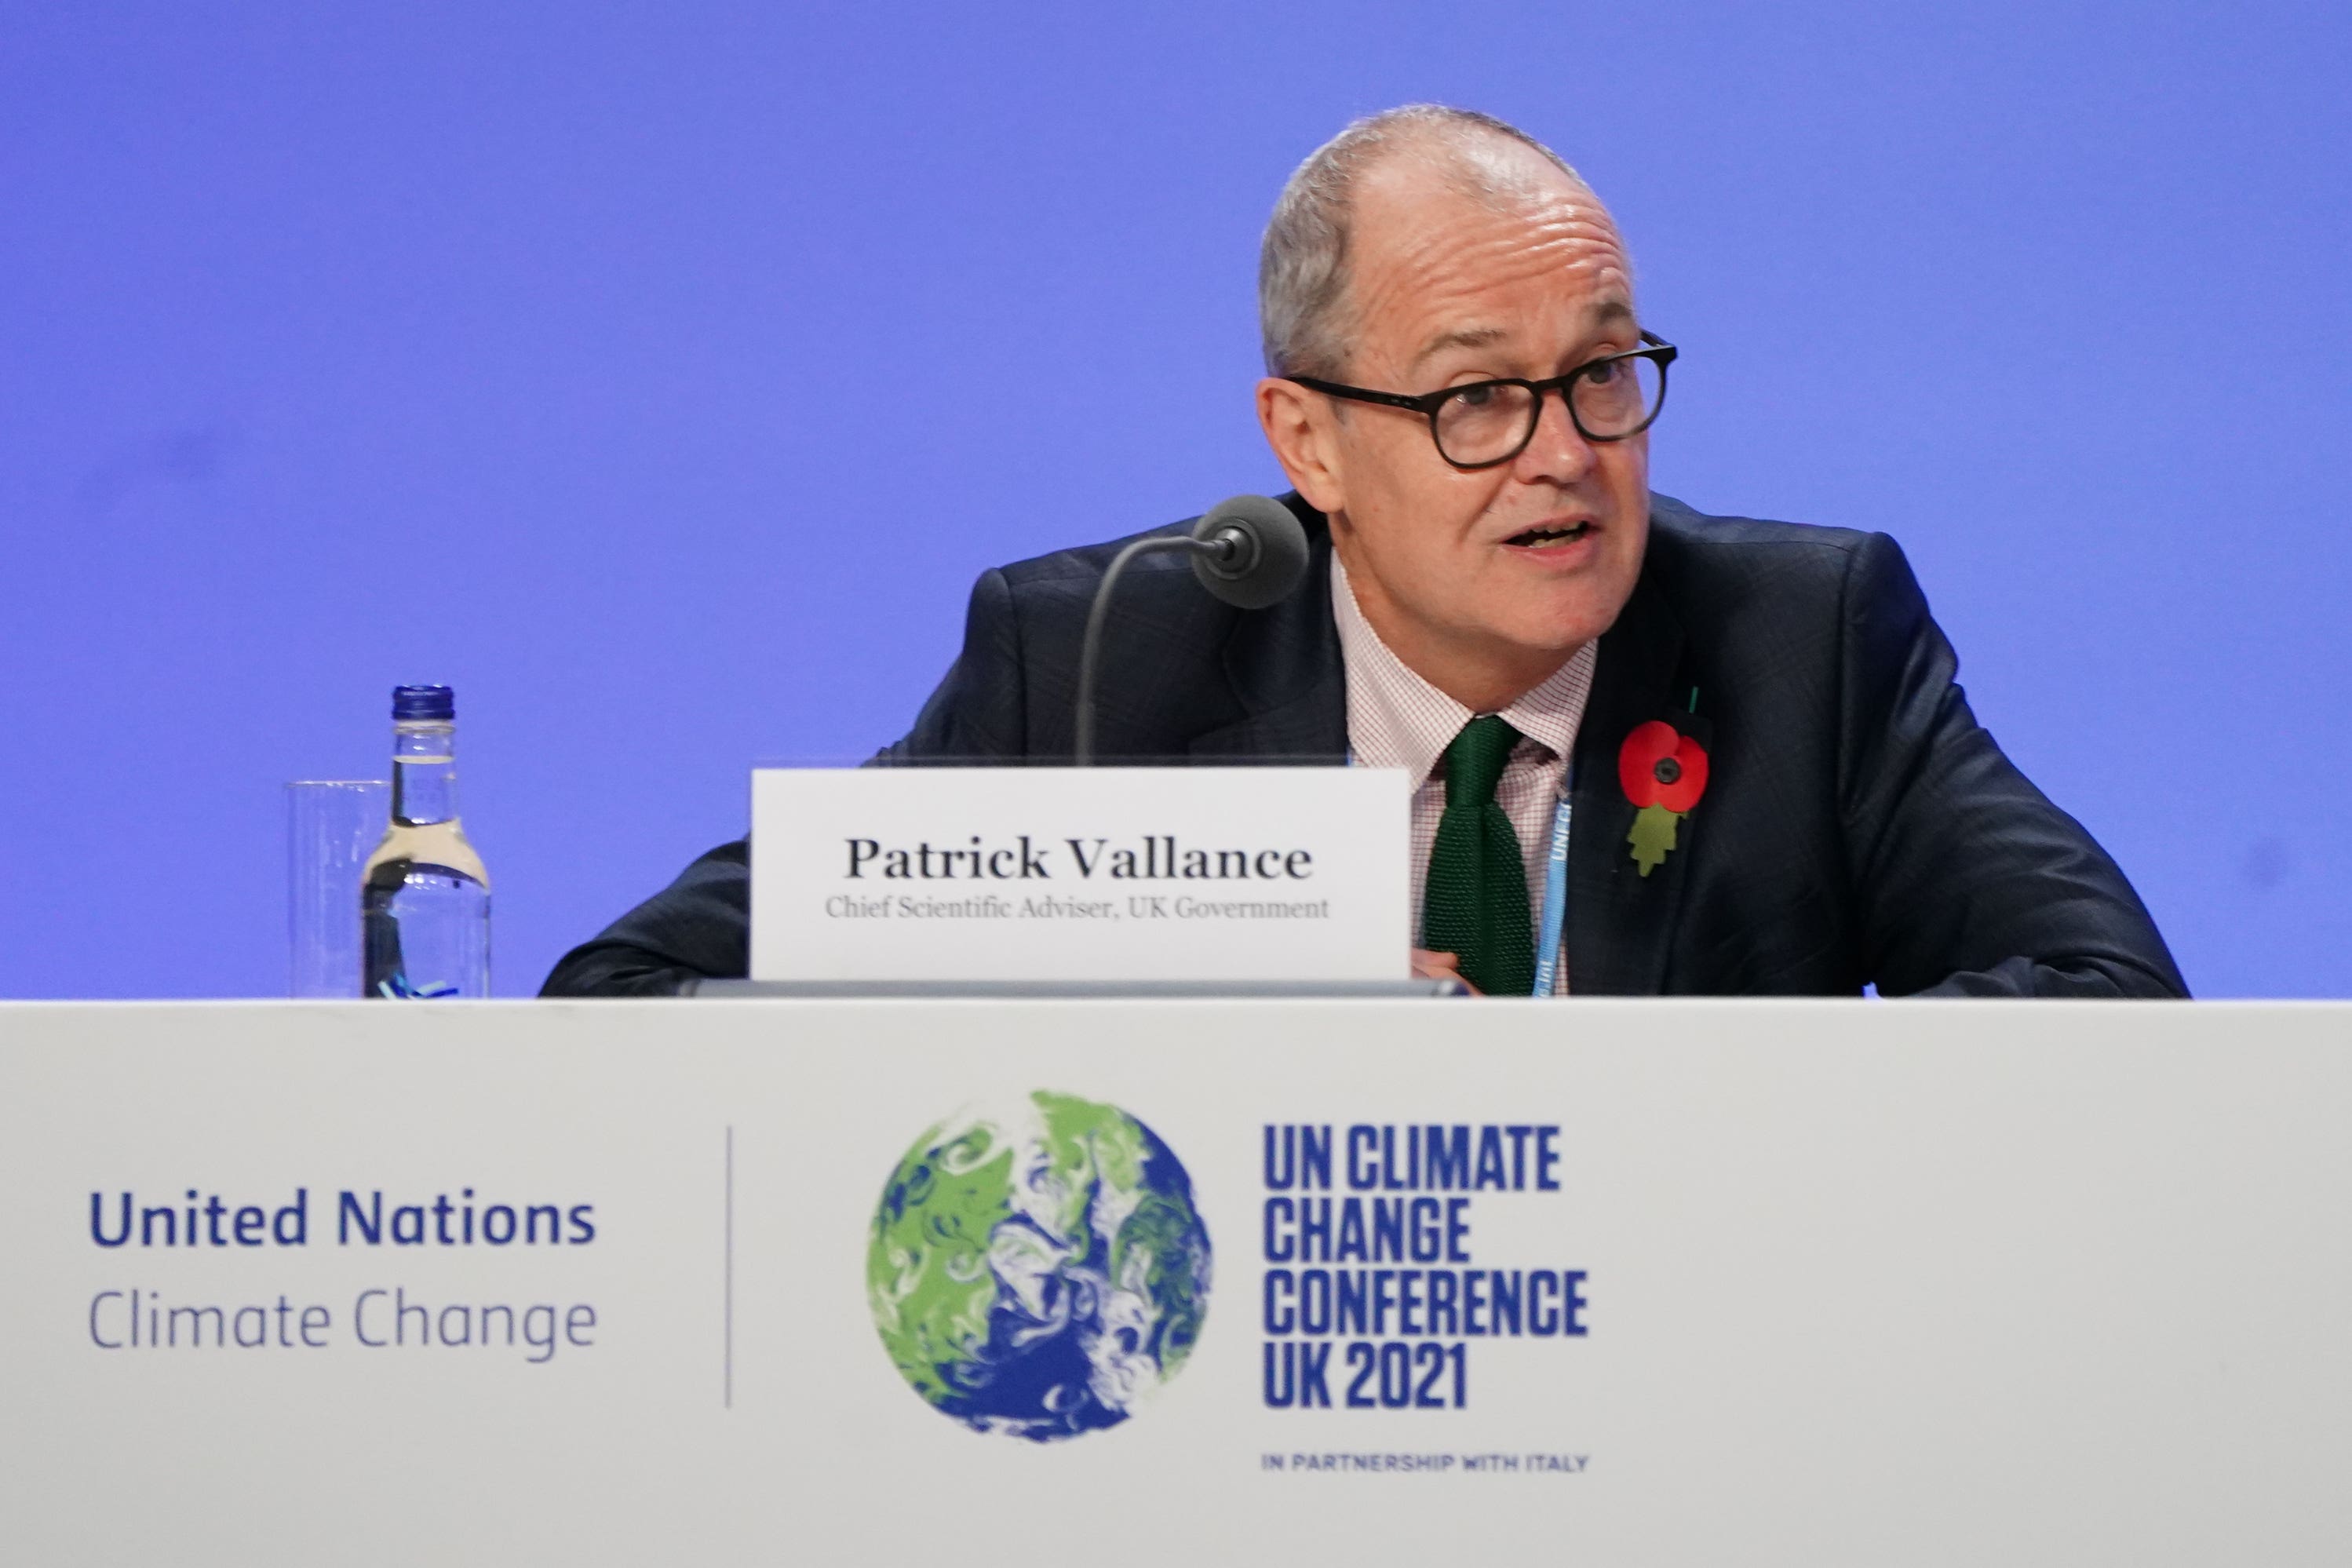 Sir Patrick Vallance issues warning over net-zero goal The Independent